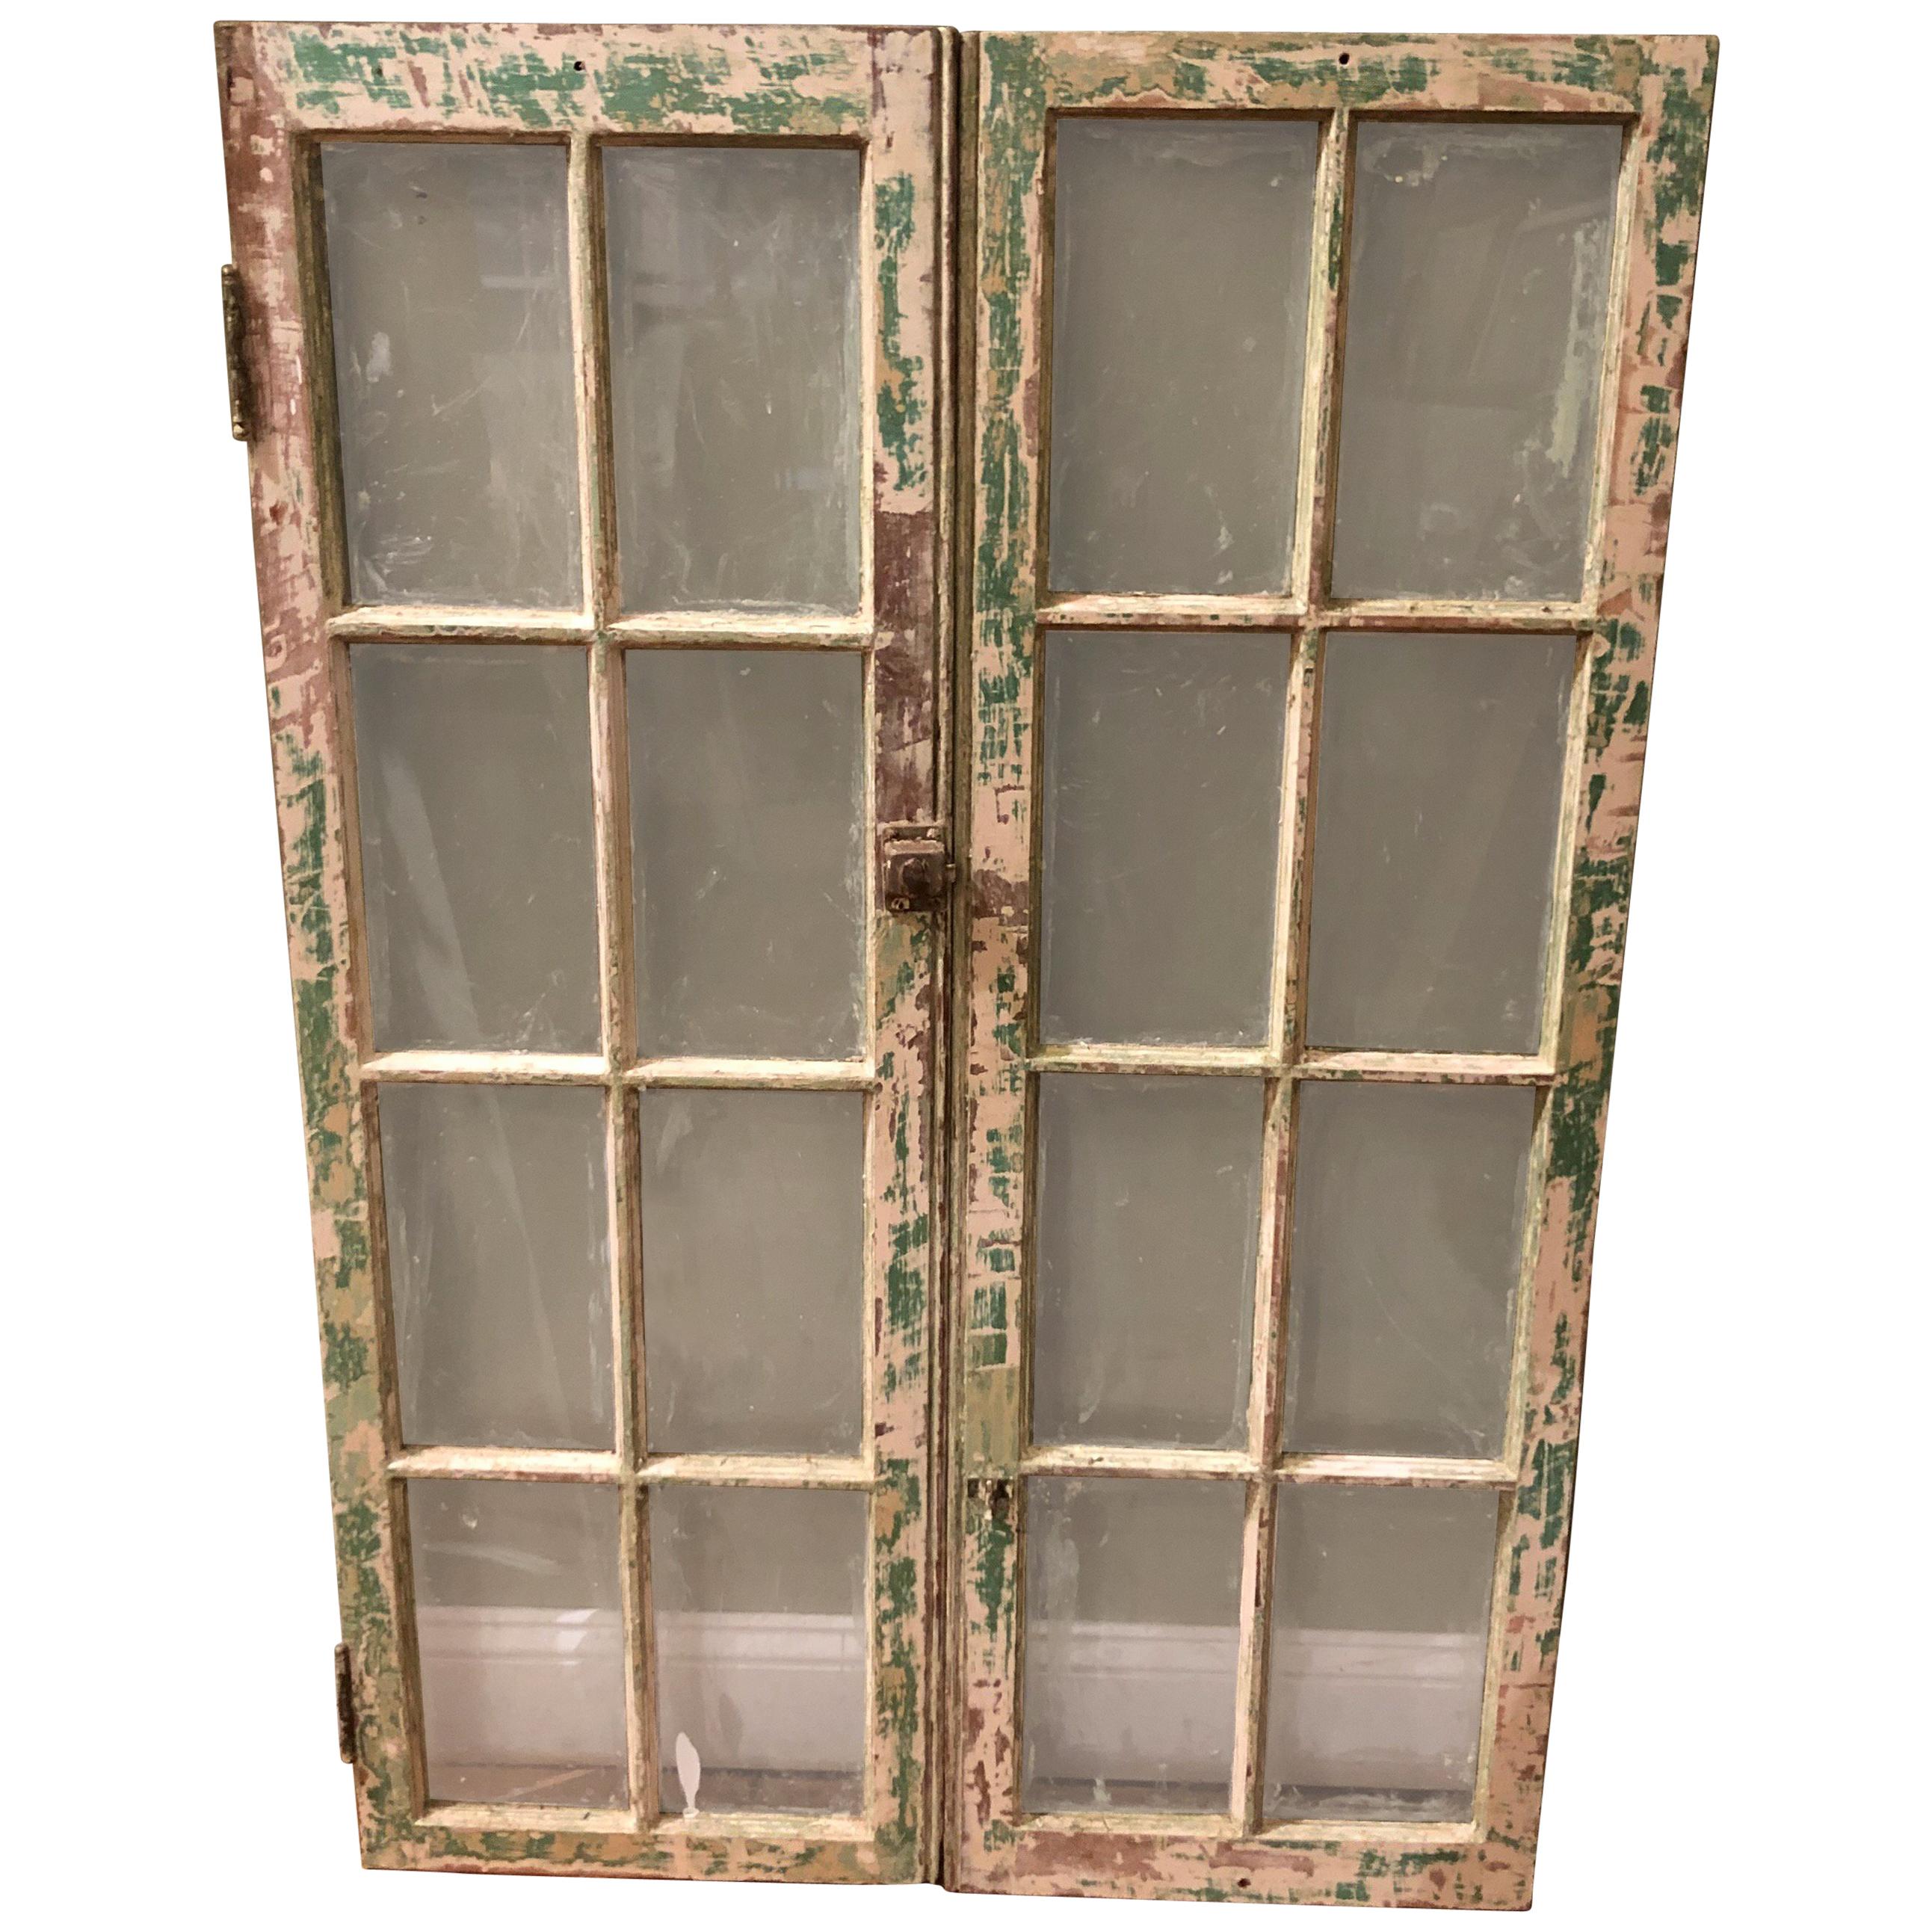 Pair of antique windows with distressed green paint finish. Use as real windows or add a mirror back to them and hang on a wall. Great architectural pieces for a farmhouse or country style home. Pair measures: 48.25 H x 32.25 W x 1.50 D. Each window